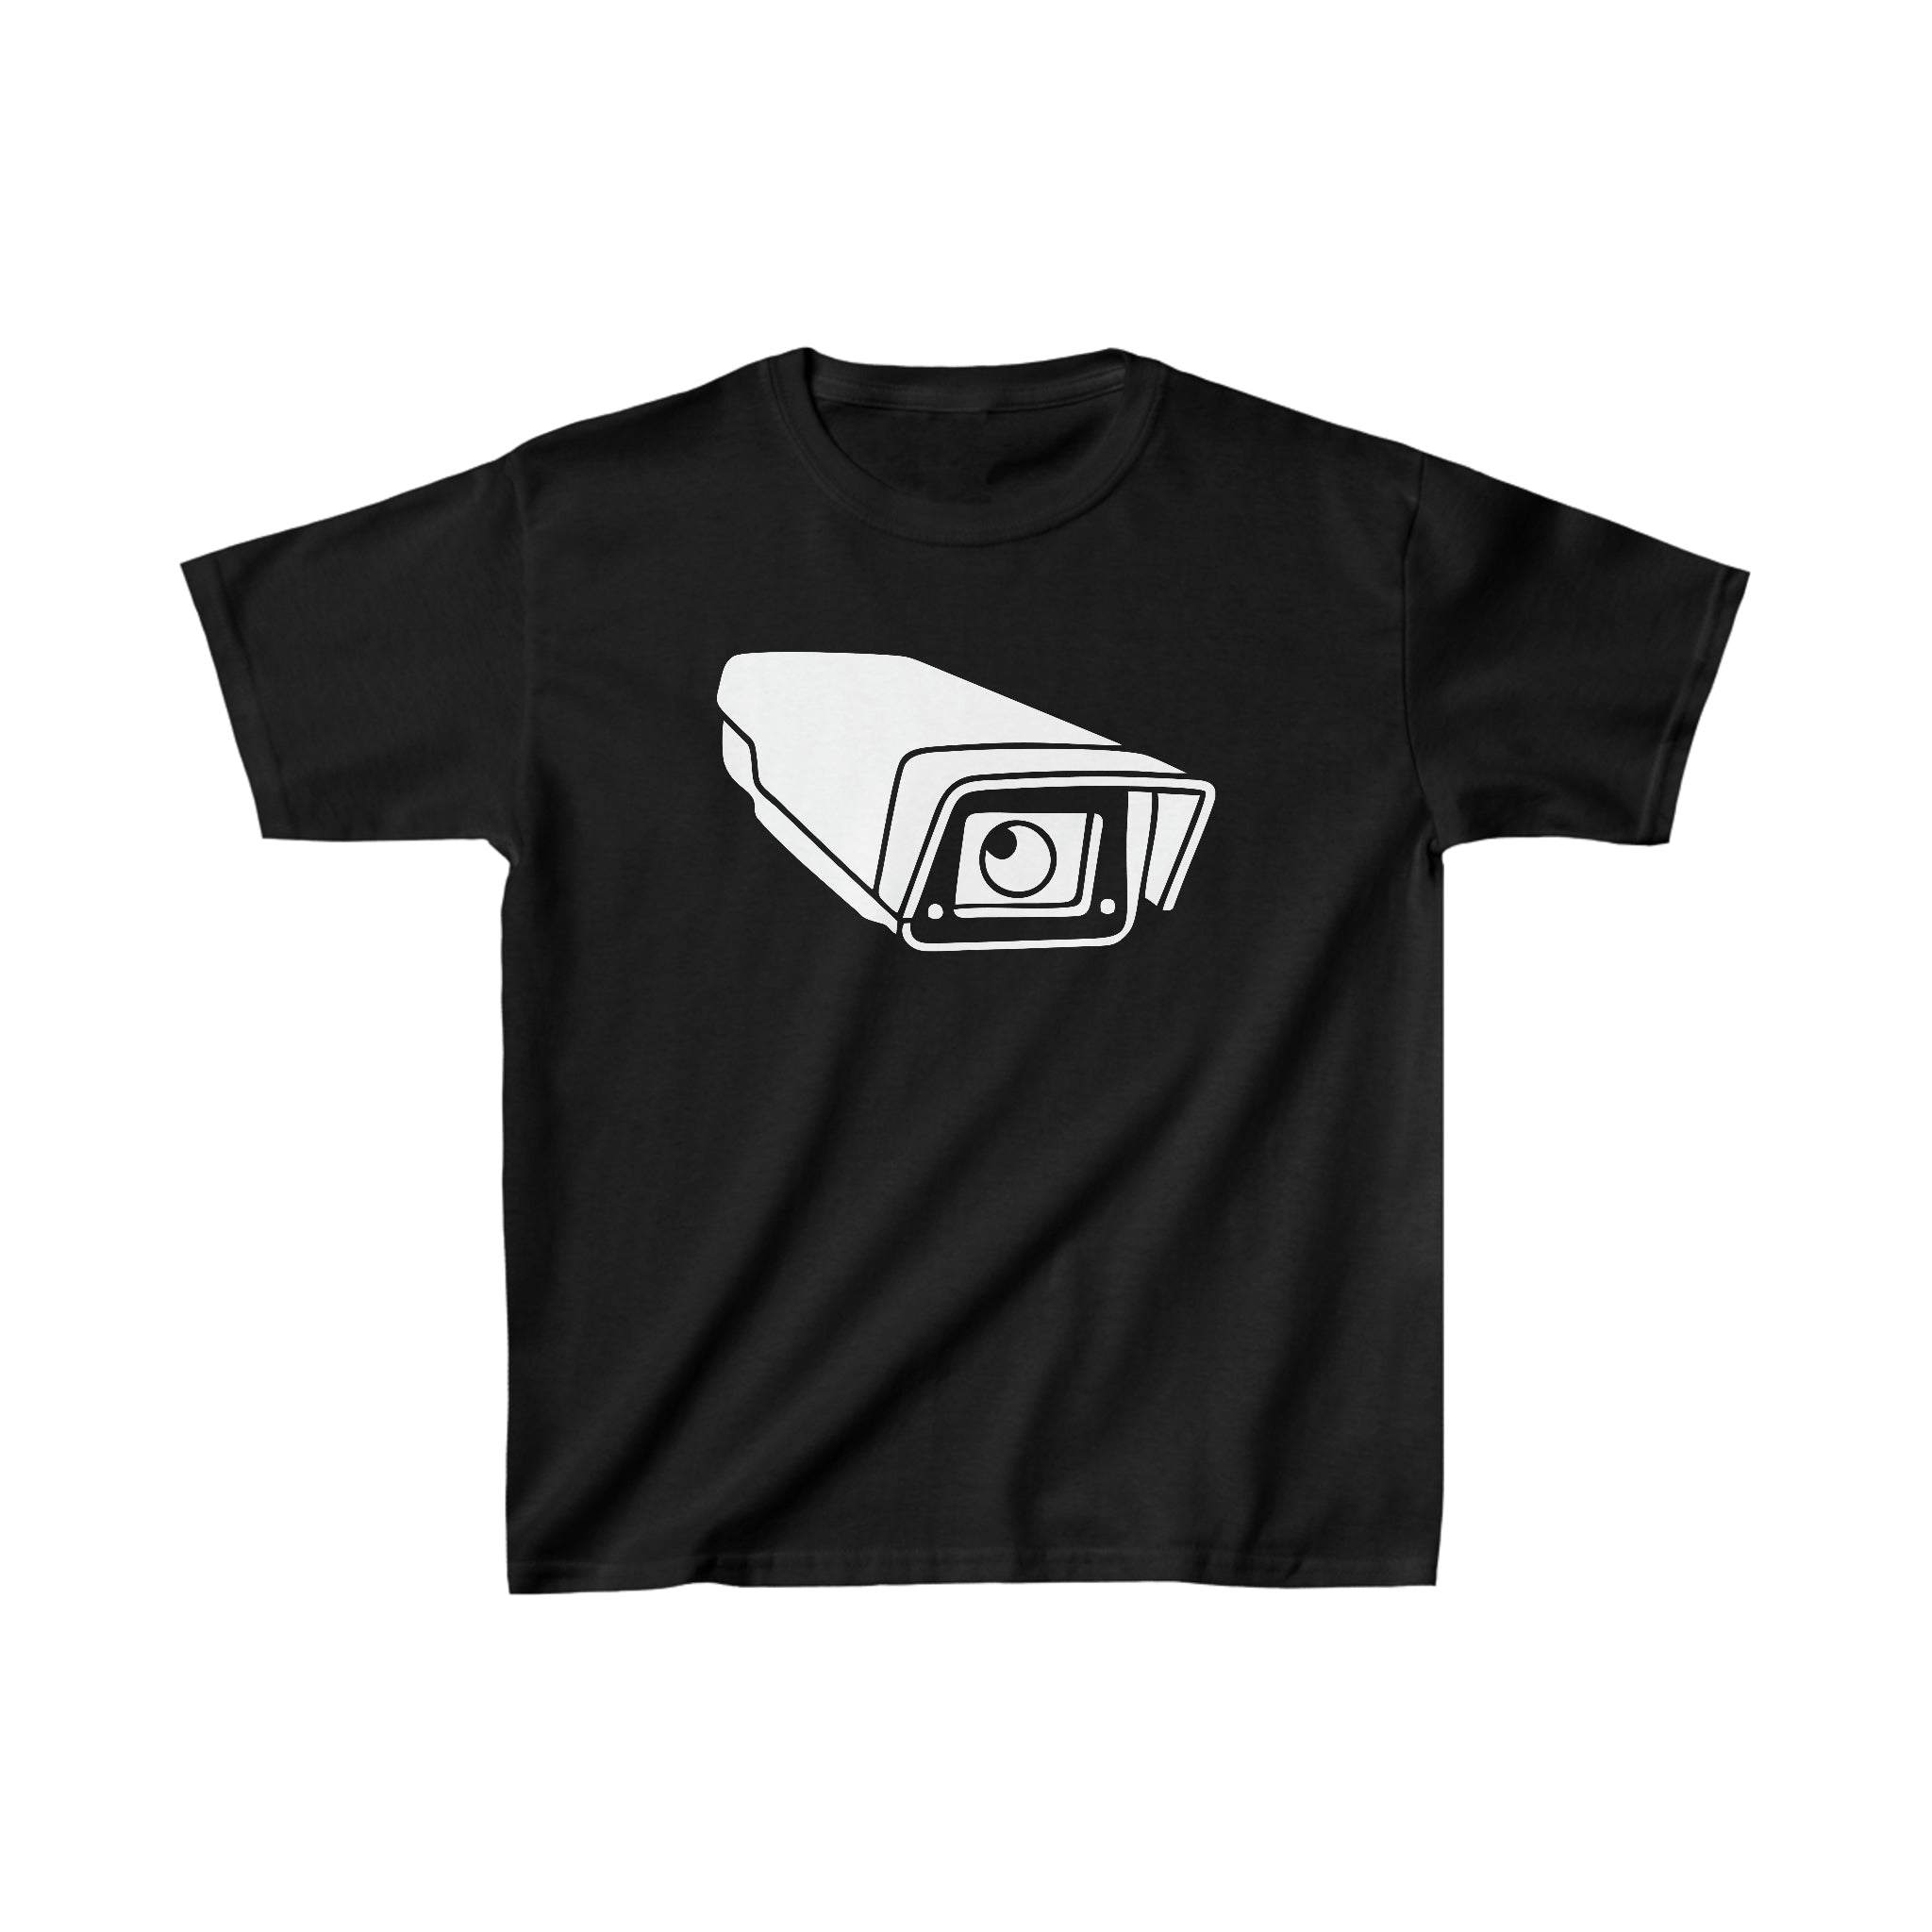 Camera Youth tee with camera lens logo Black on White background